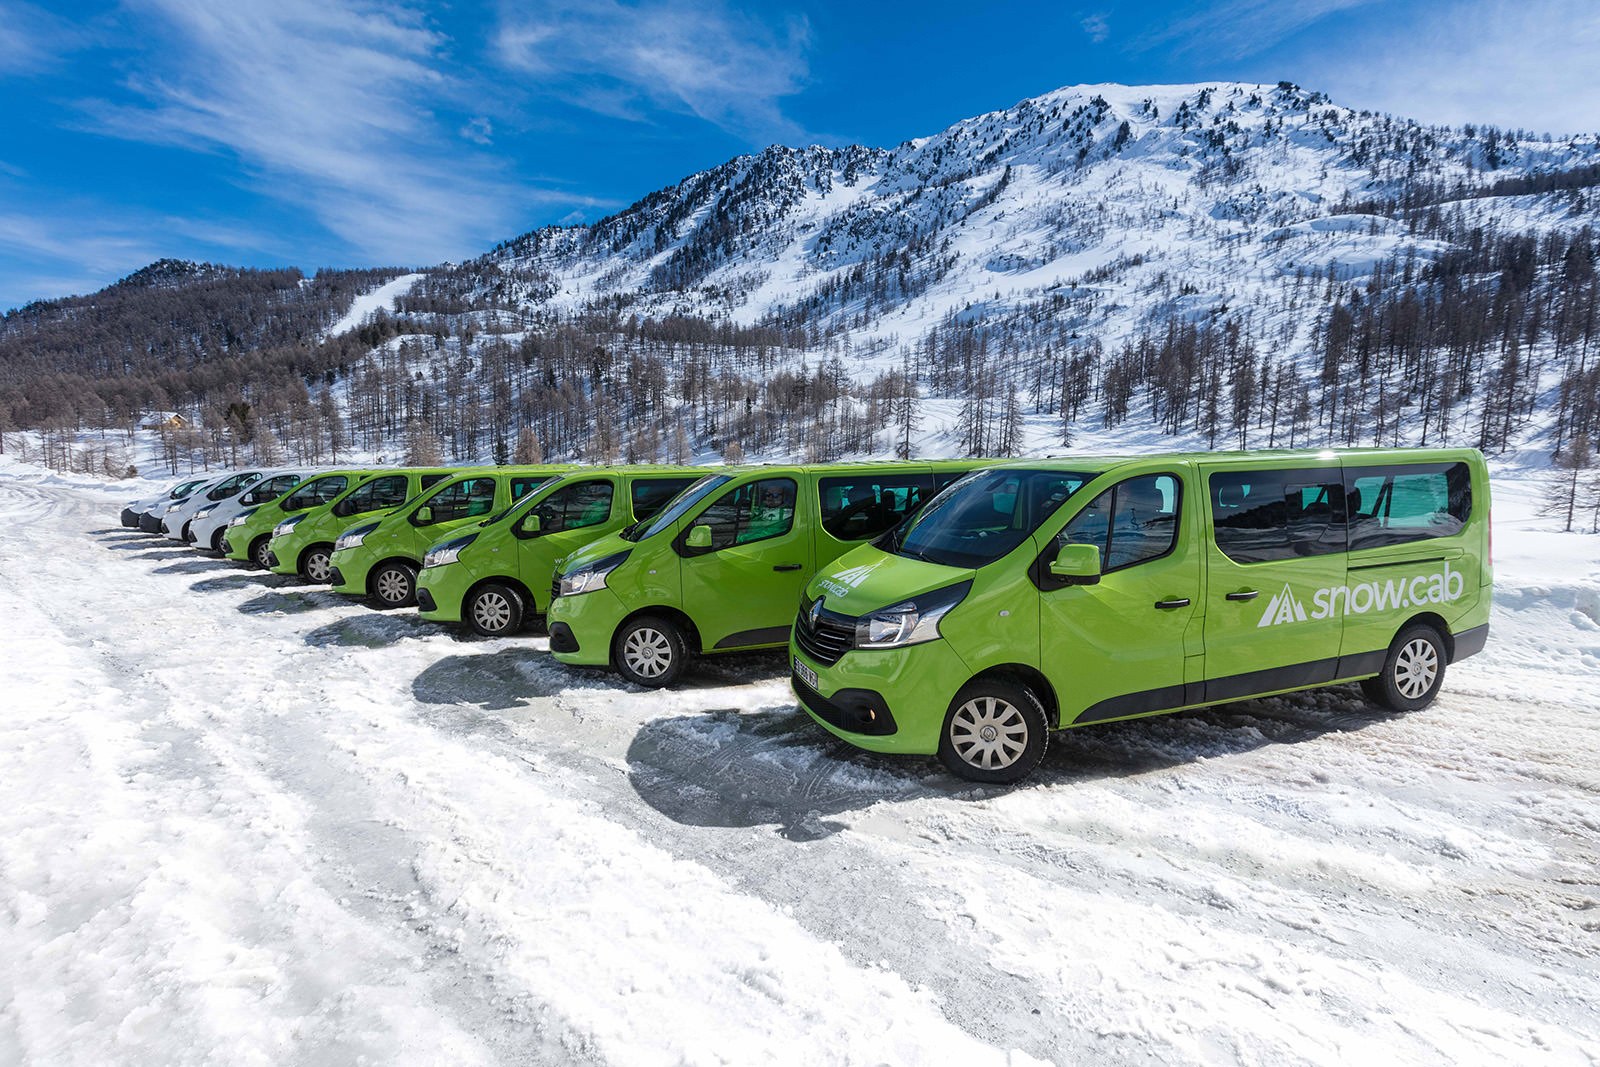 Snow Cab - ski transfers with carbon offset as standard